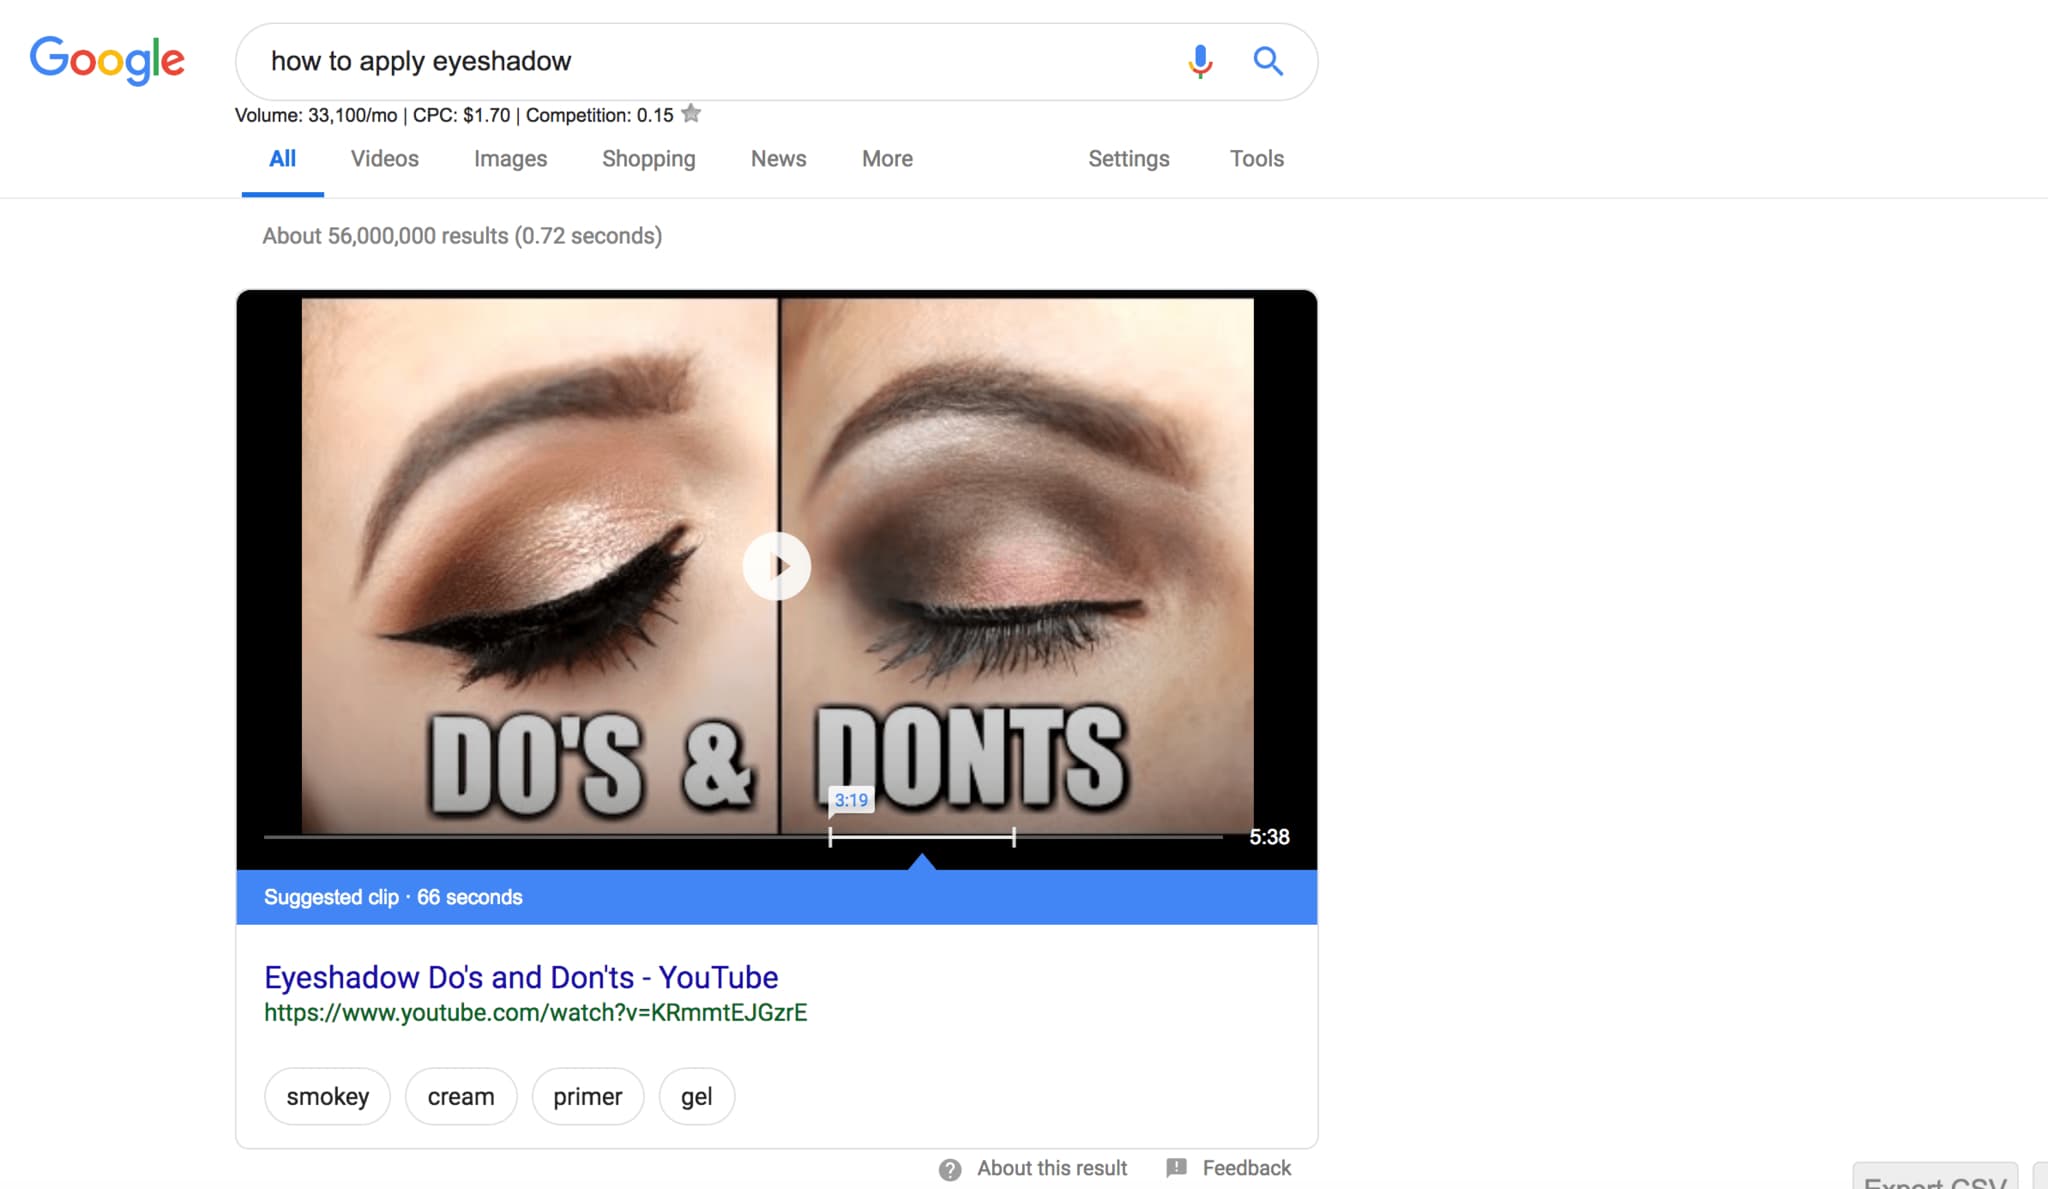 youtube featured snippet showcasing eye makeup tutorial